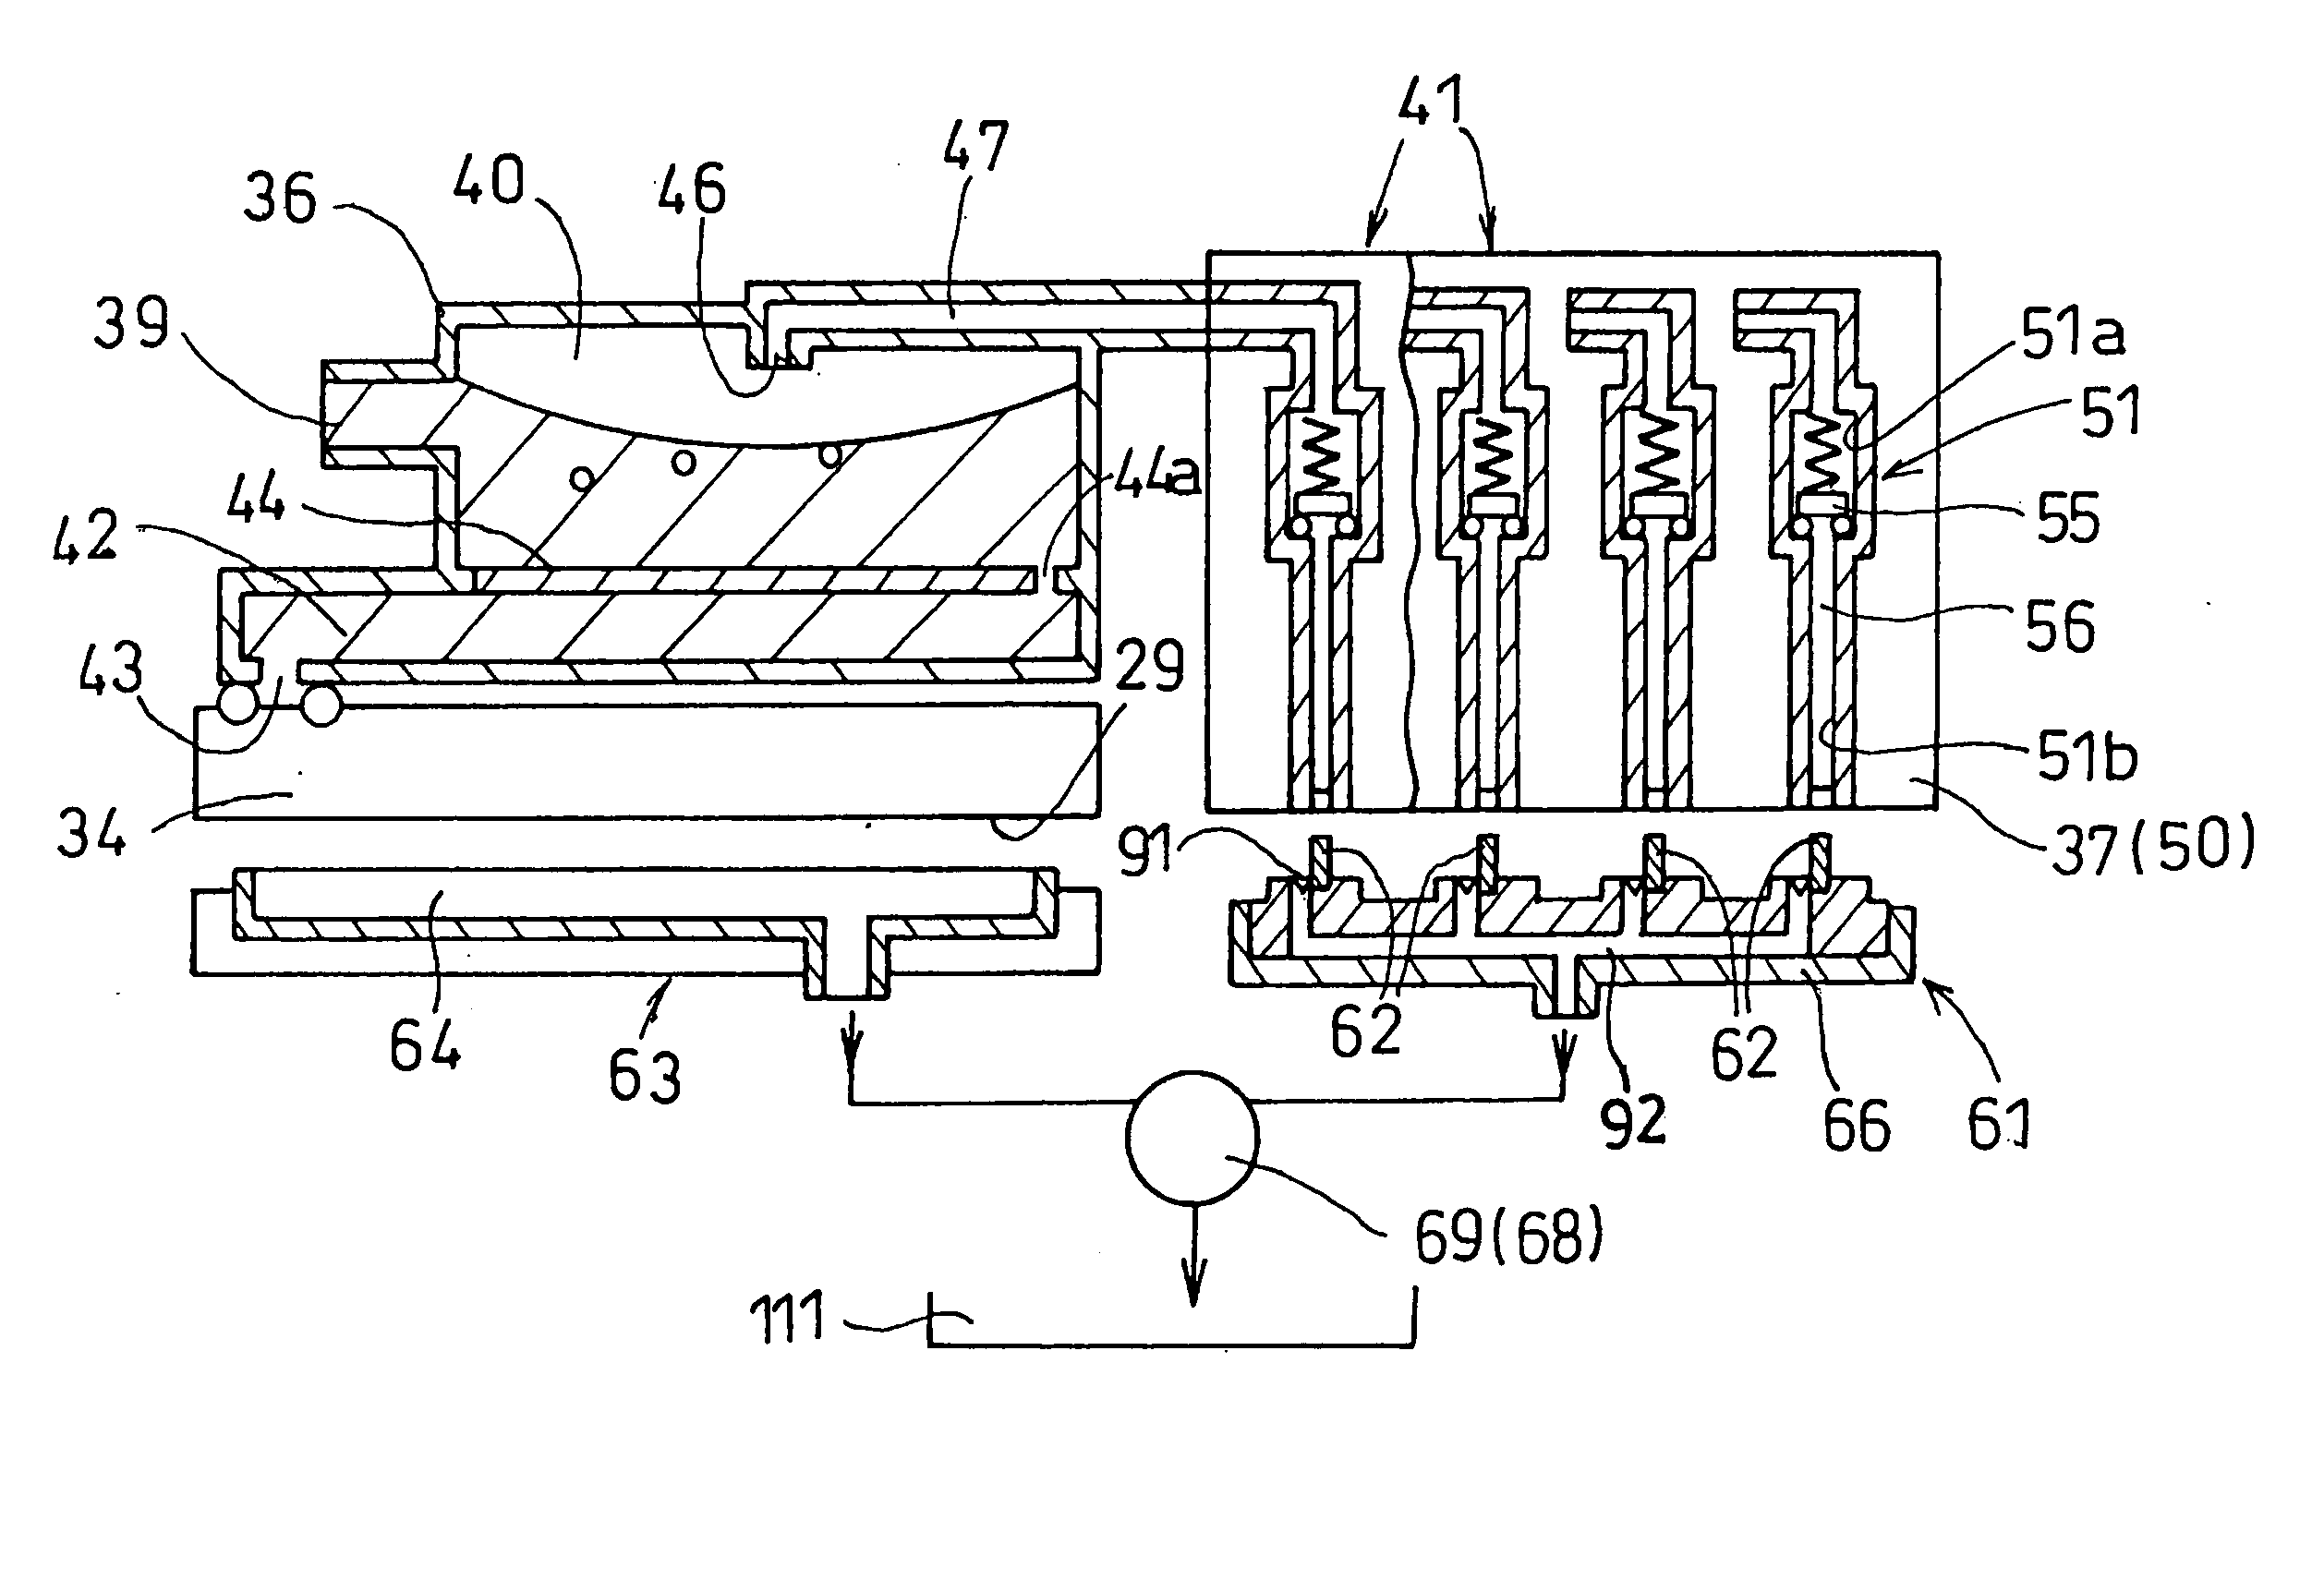 Cap and droplet discharge apparatus